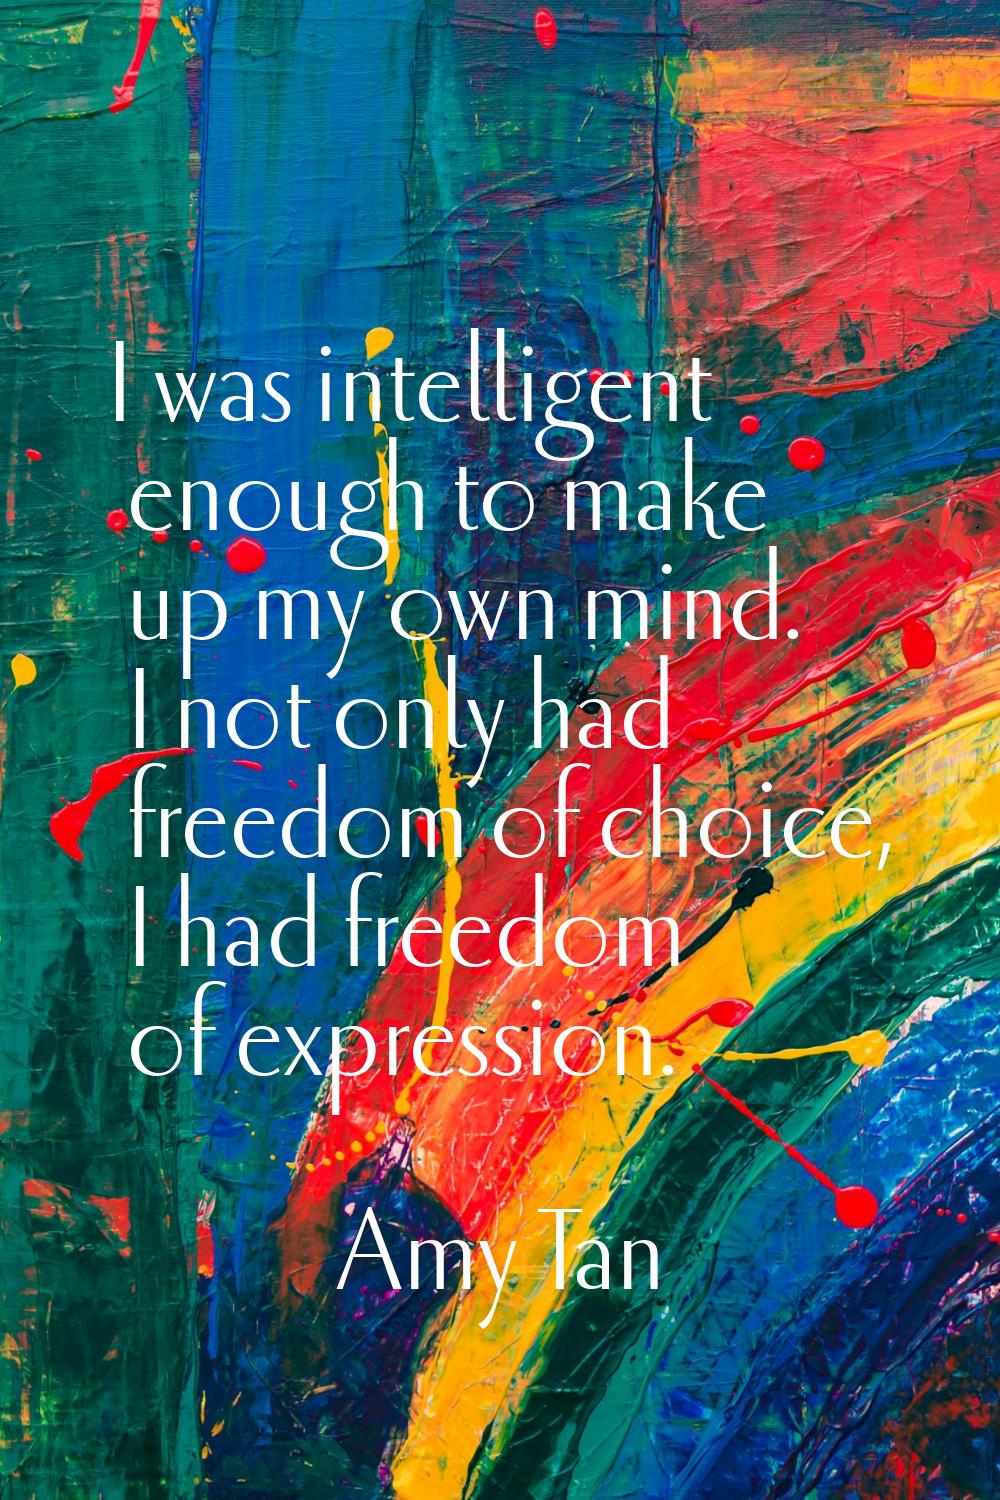 I was intelligent enough to make up my own mind. I not only had freedom of choice, I had freedom of